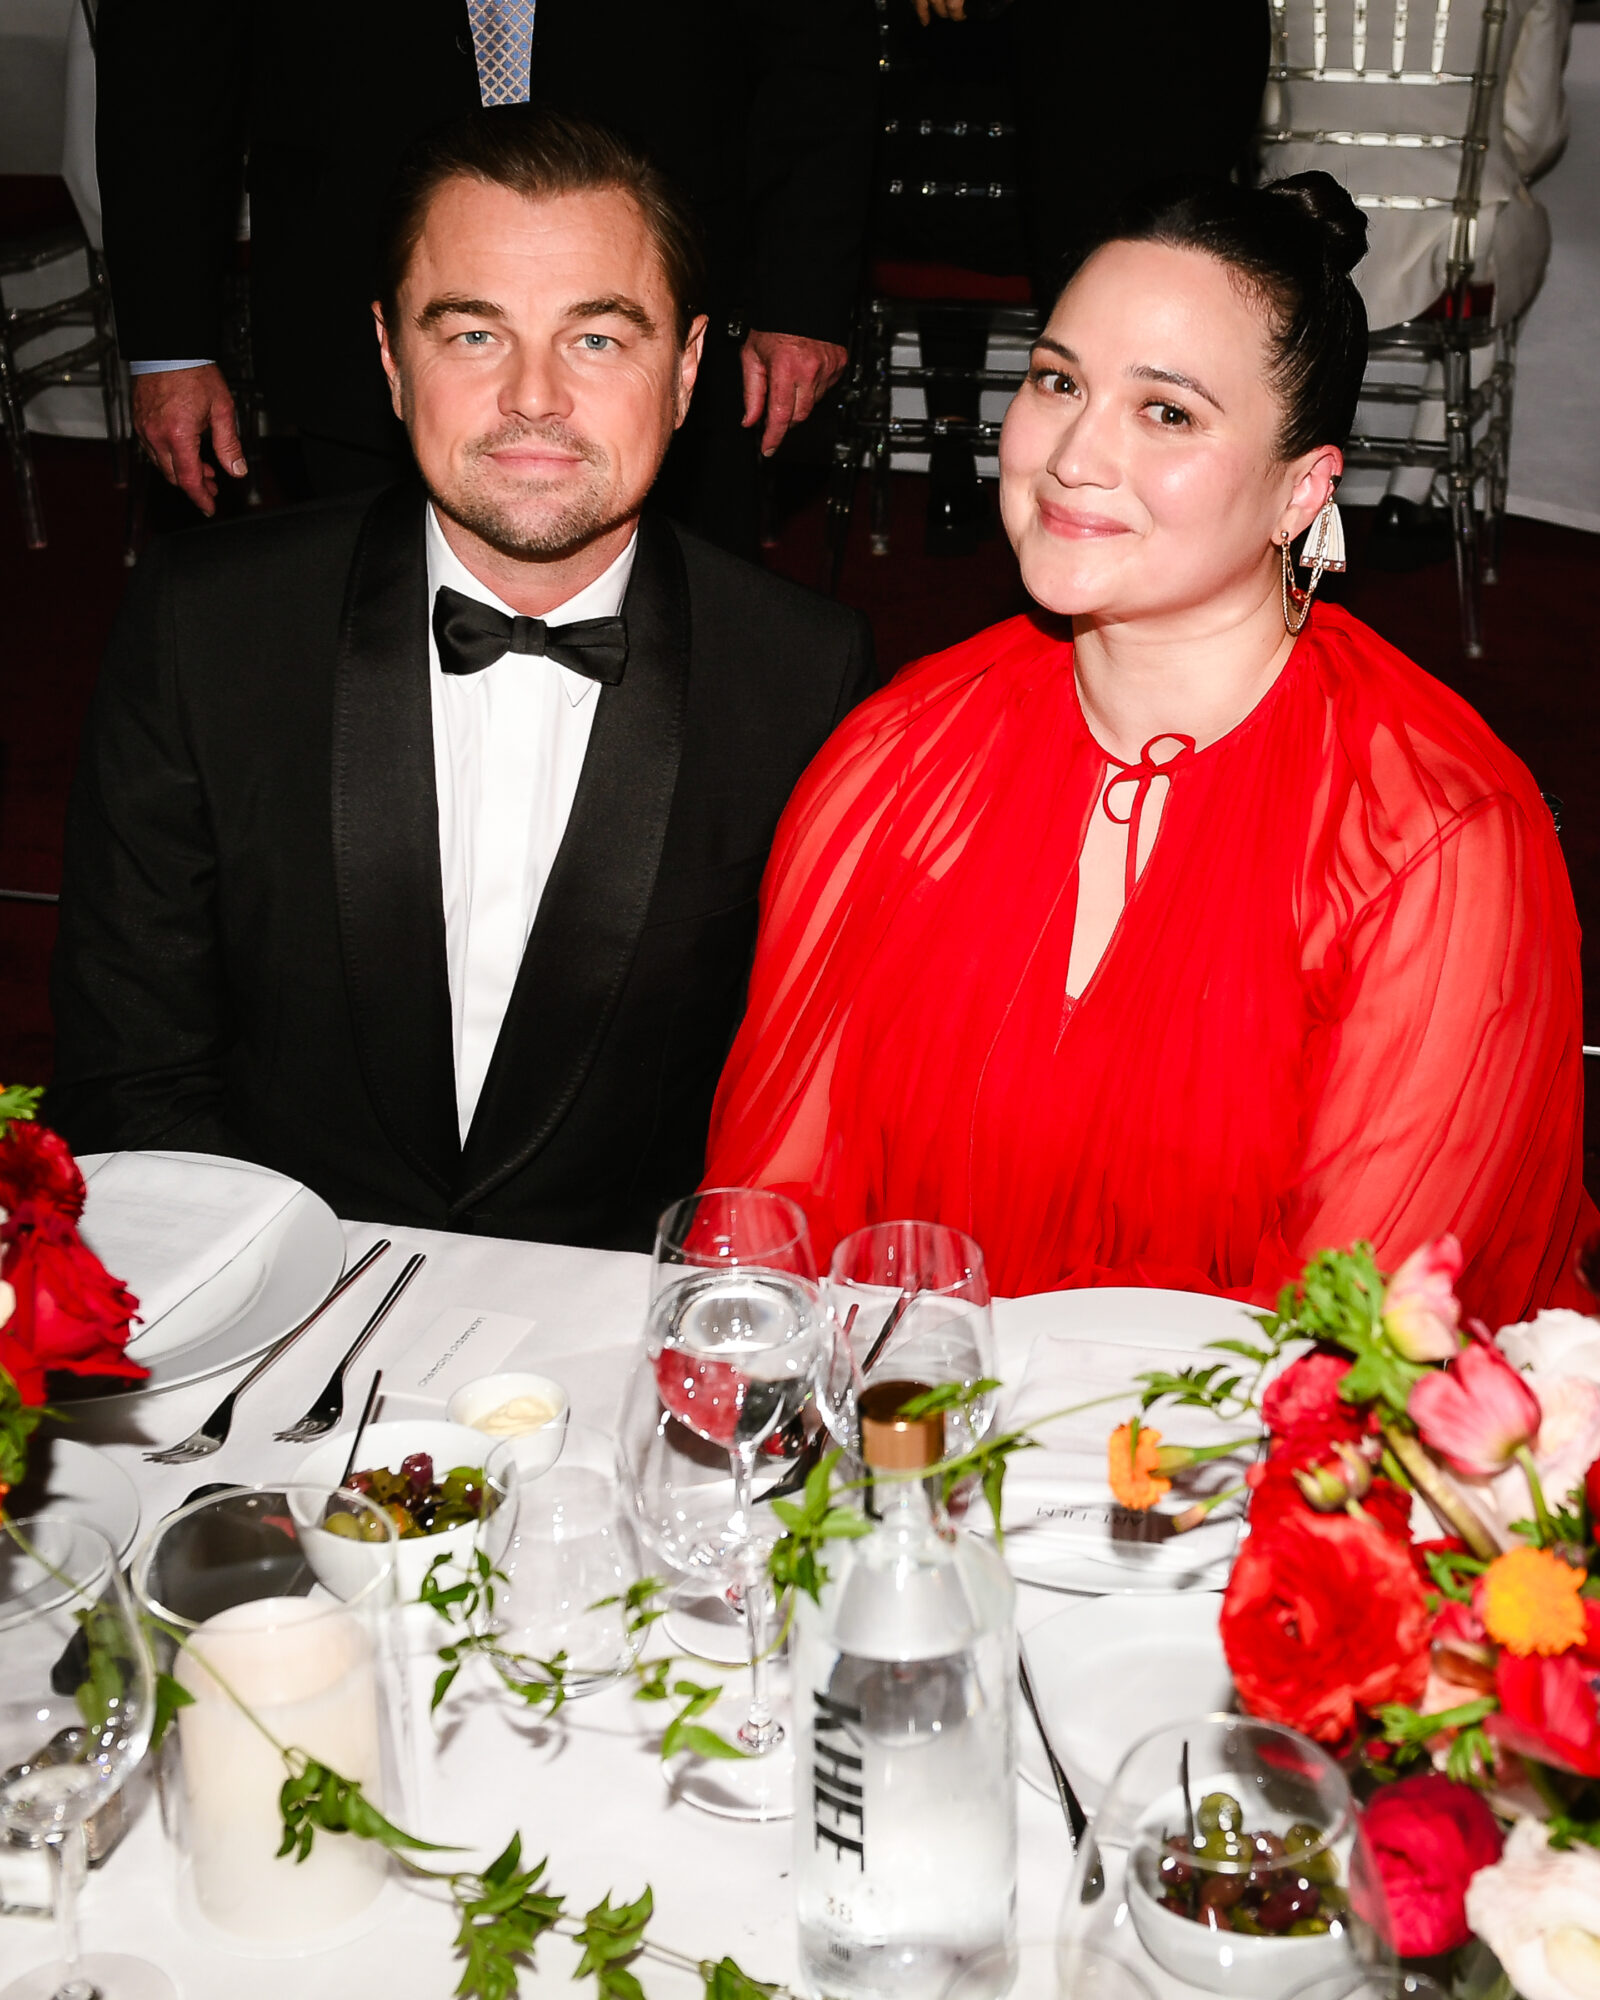 Leonardo DiCaprio and Lily Gladstone posed together, encapsulating the gala's spirit of artistry and collaboration. (Photo by Stefanie Keenan/Getty Images for LACMA)
